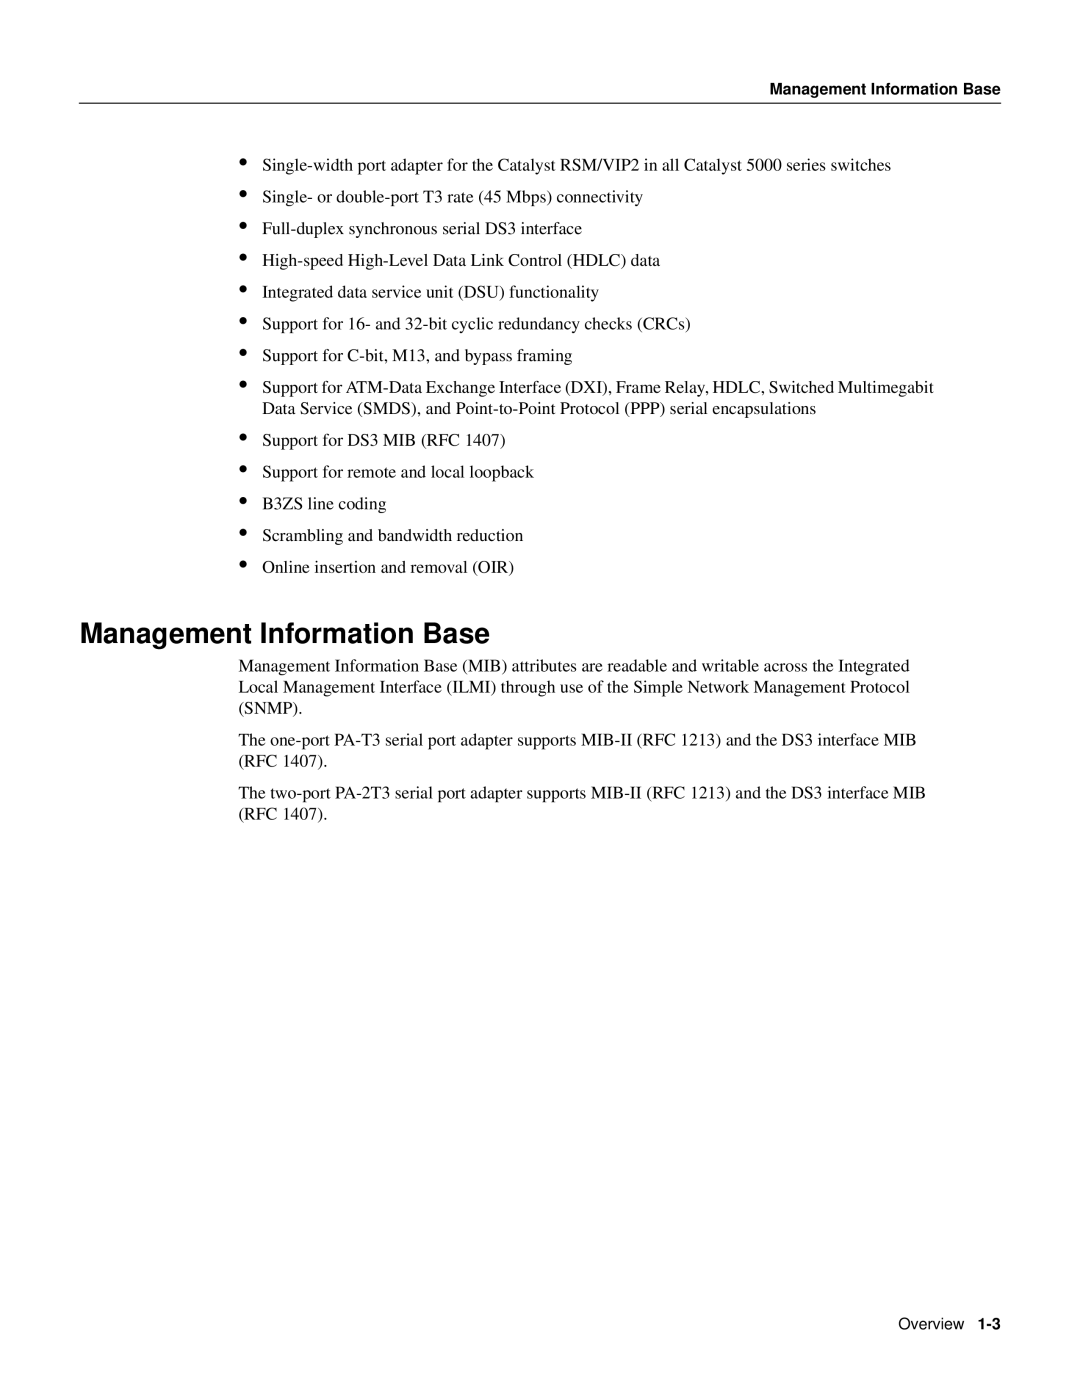 Cisco Systems PA-T3 manual Management Information Base 